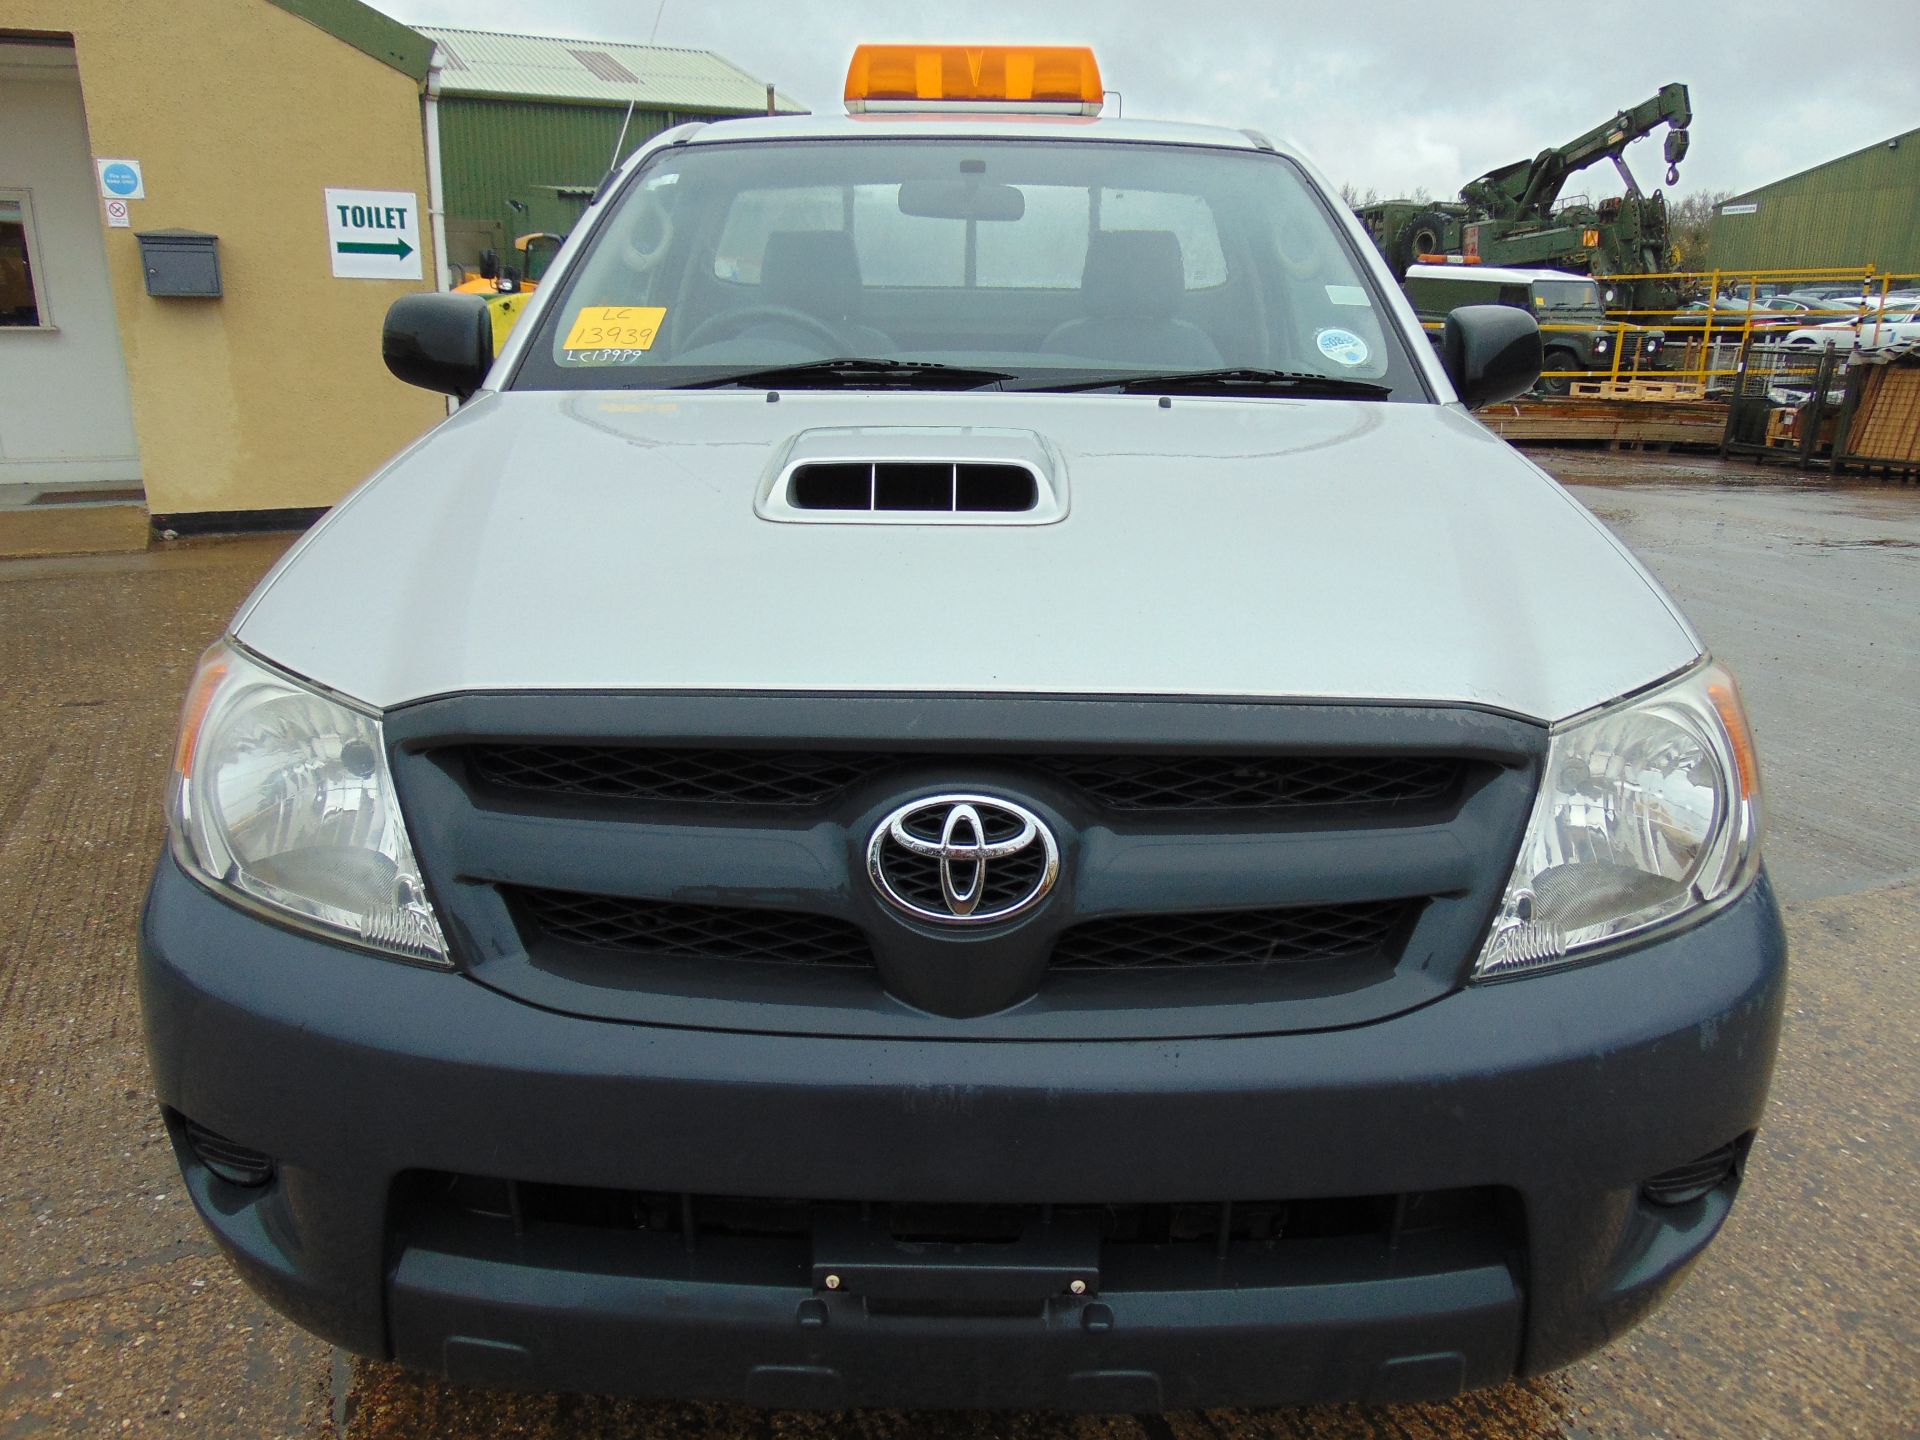 2007 Toyota Hilux 2.5 D4D Pickup - Image 2 of 17